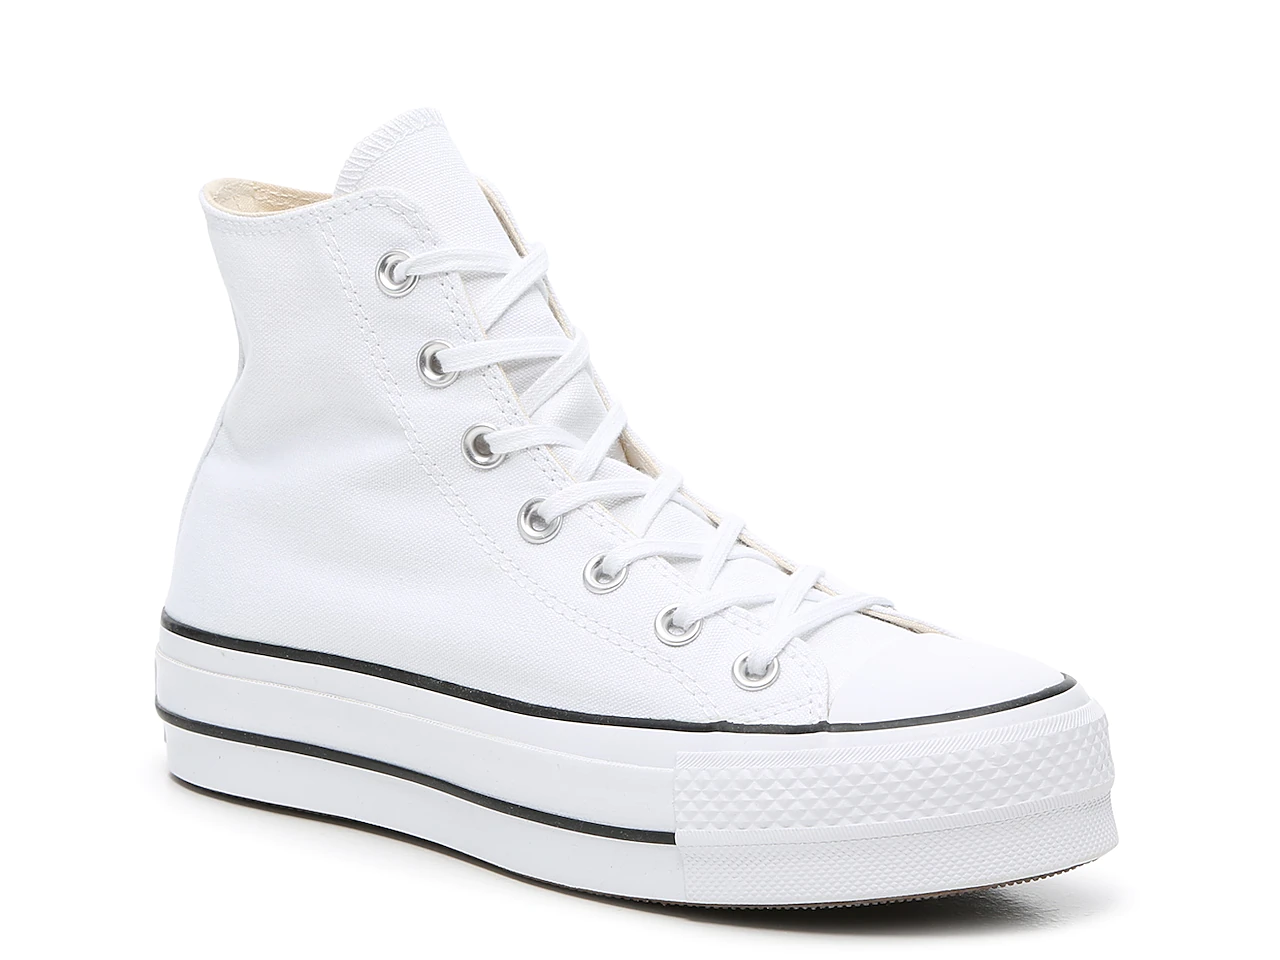 A high top sneaker in white